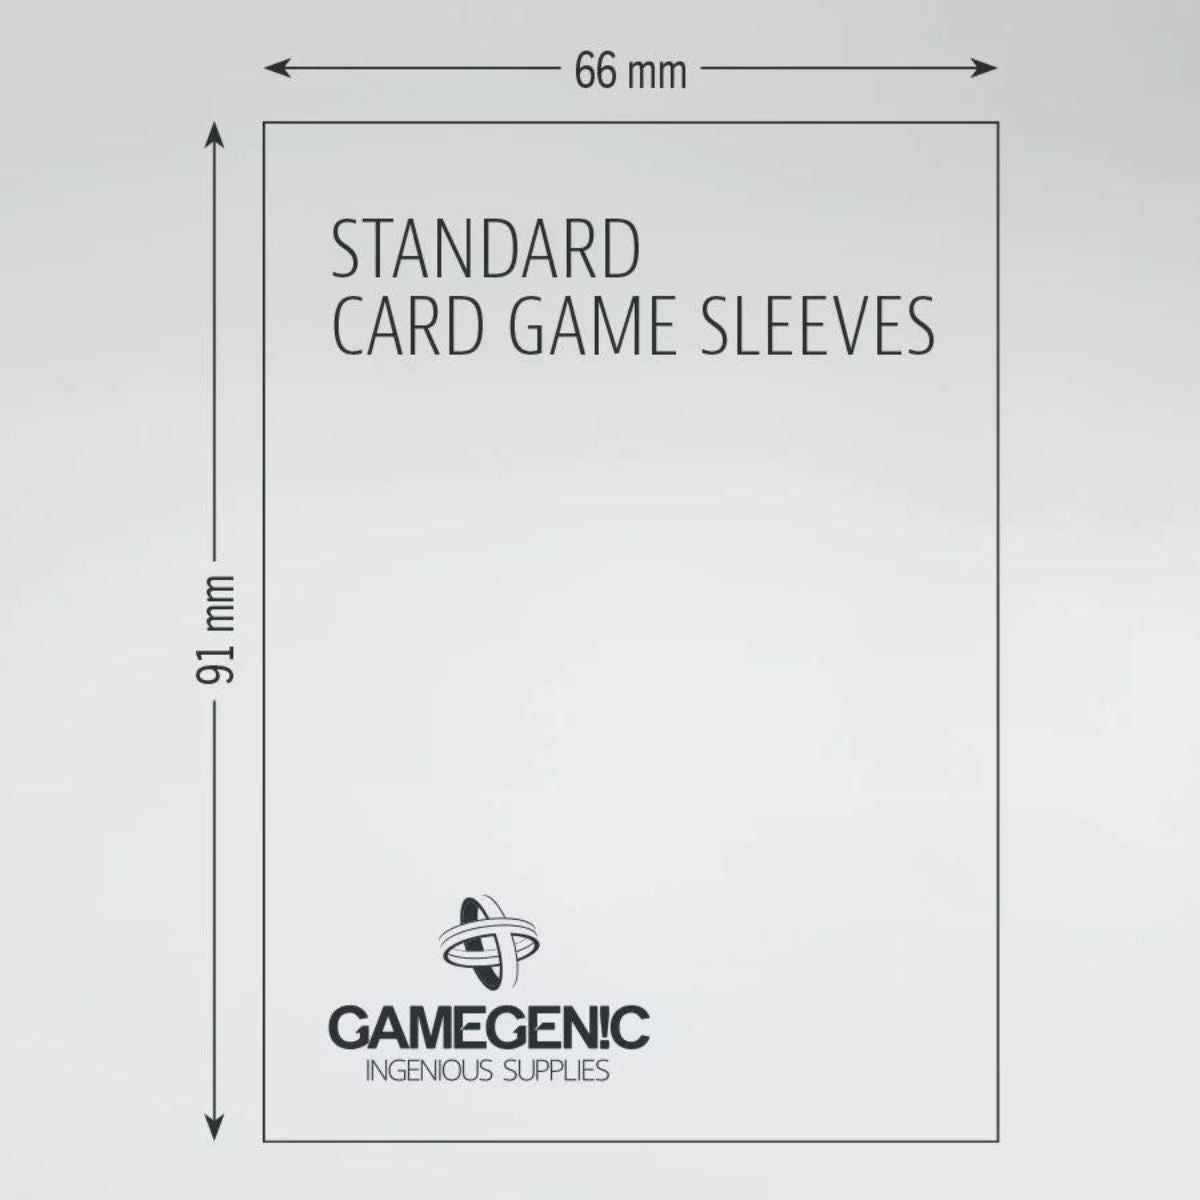 Gamegenic Sleeve Standard Card Game “Value Pack 200 ~ Matte Sleeve”-Gamegenic-Ace Cards &amp; Collectibles